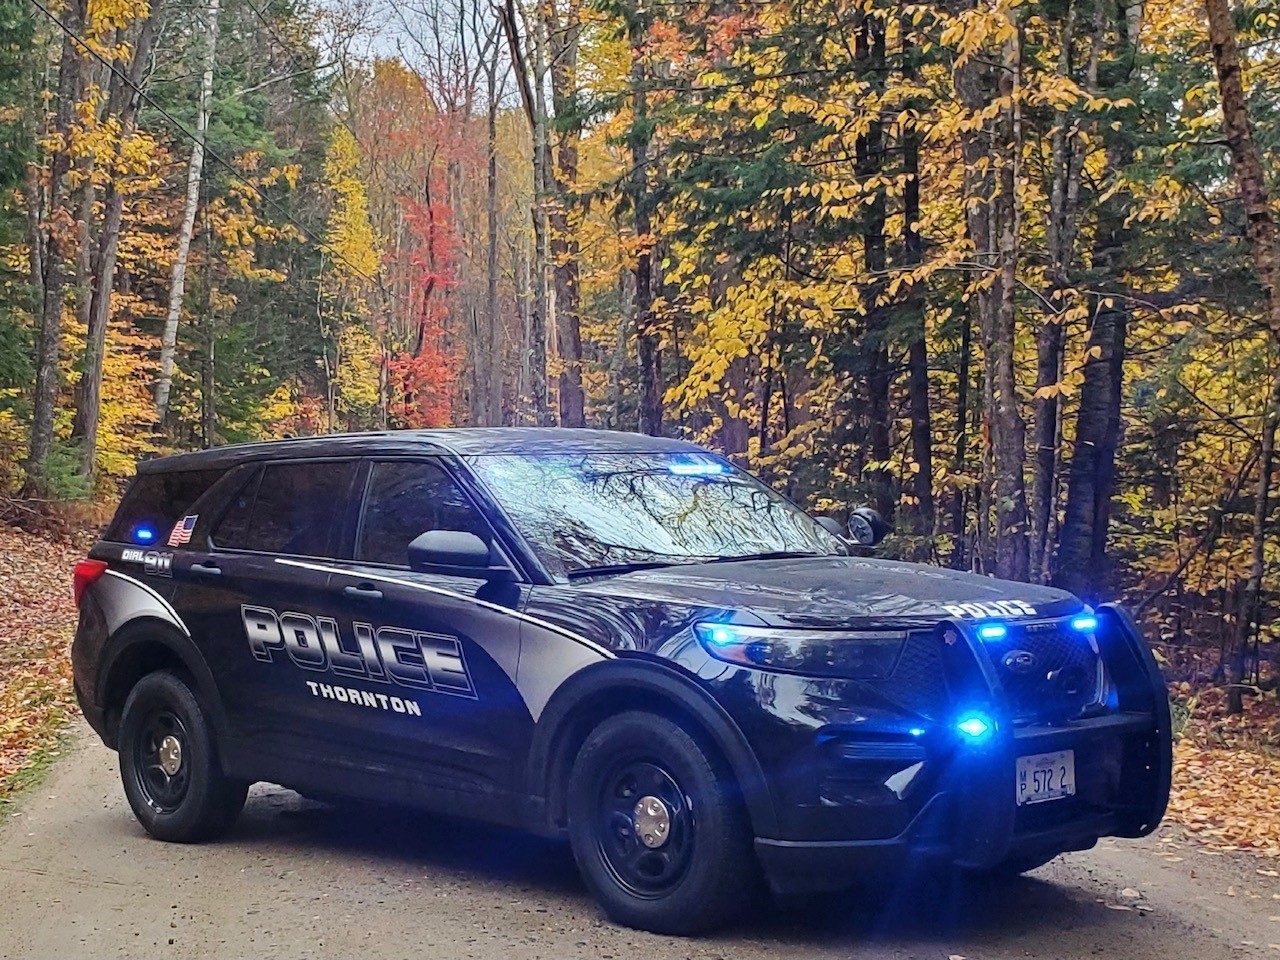 Thornton Police Department, NH Public Safety Jobs